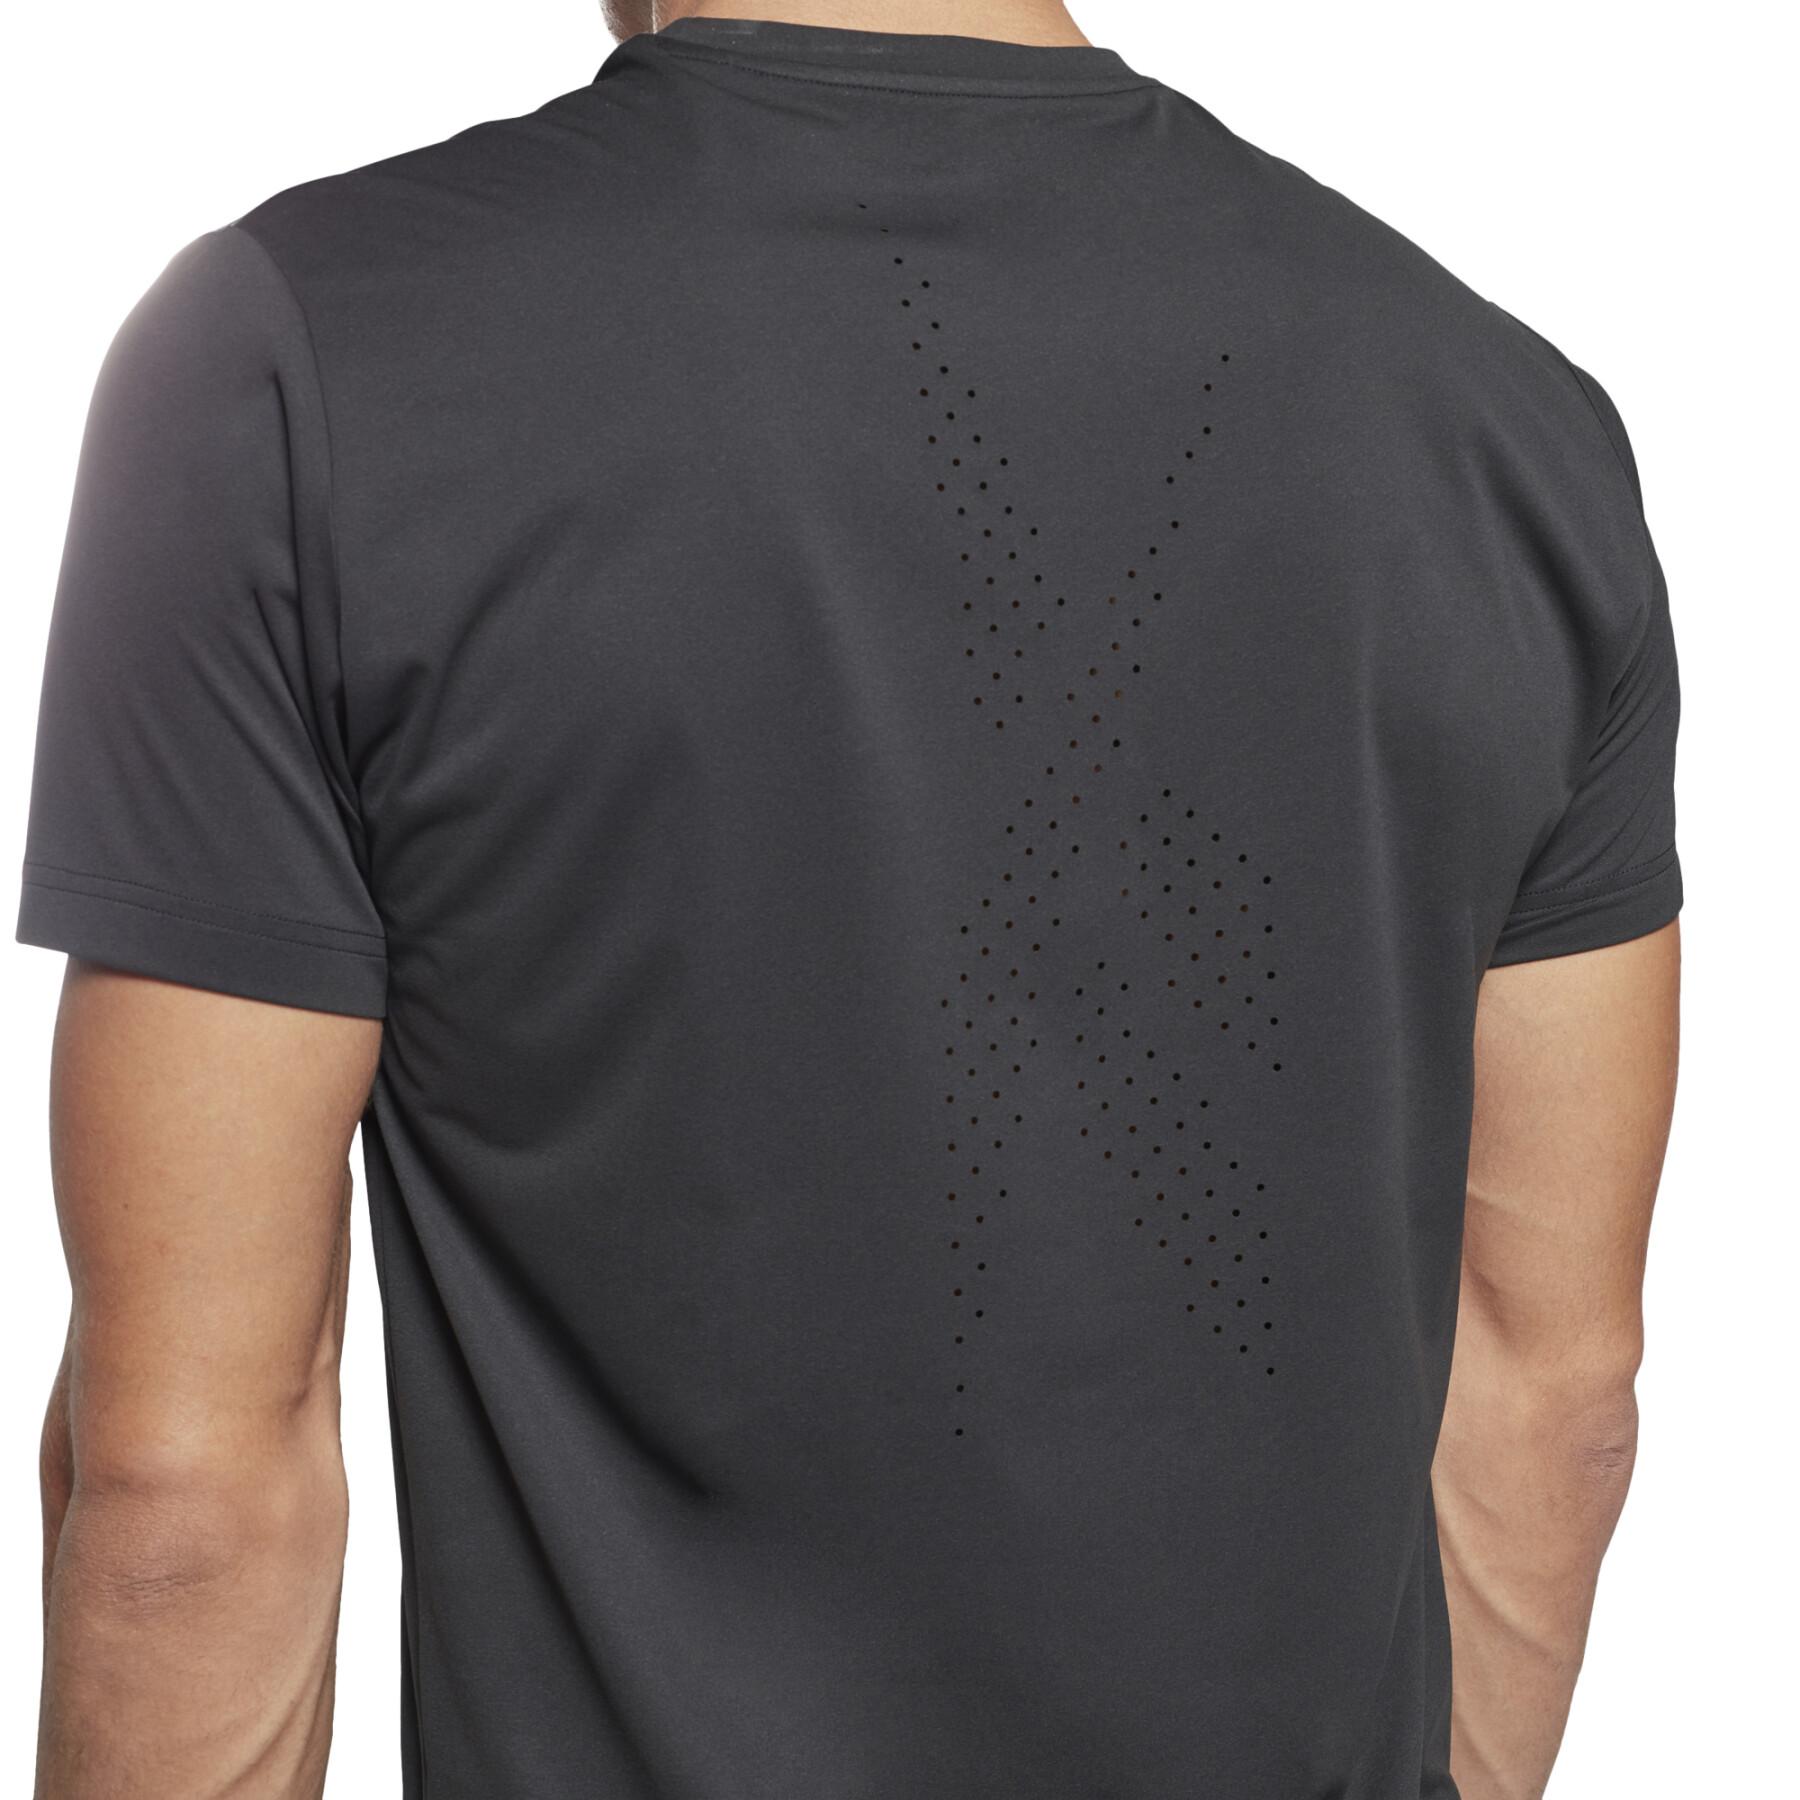 Perforated T-shirt Reebok United By Fitness